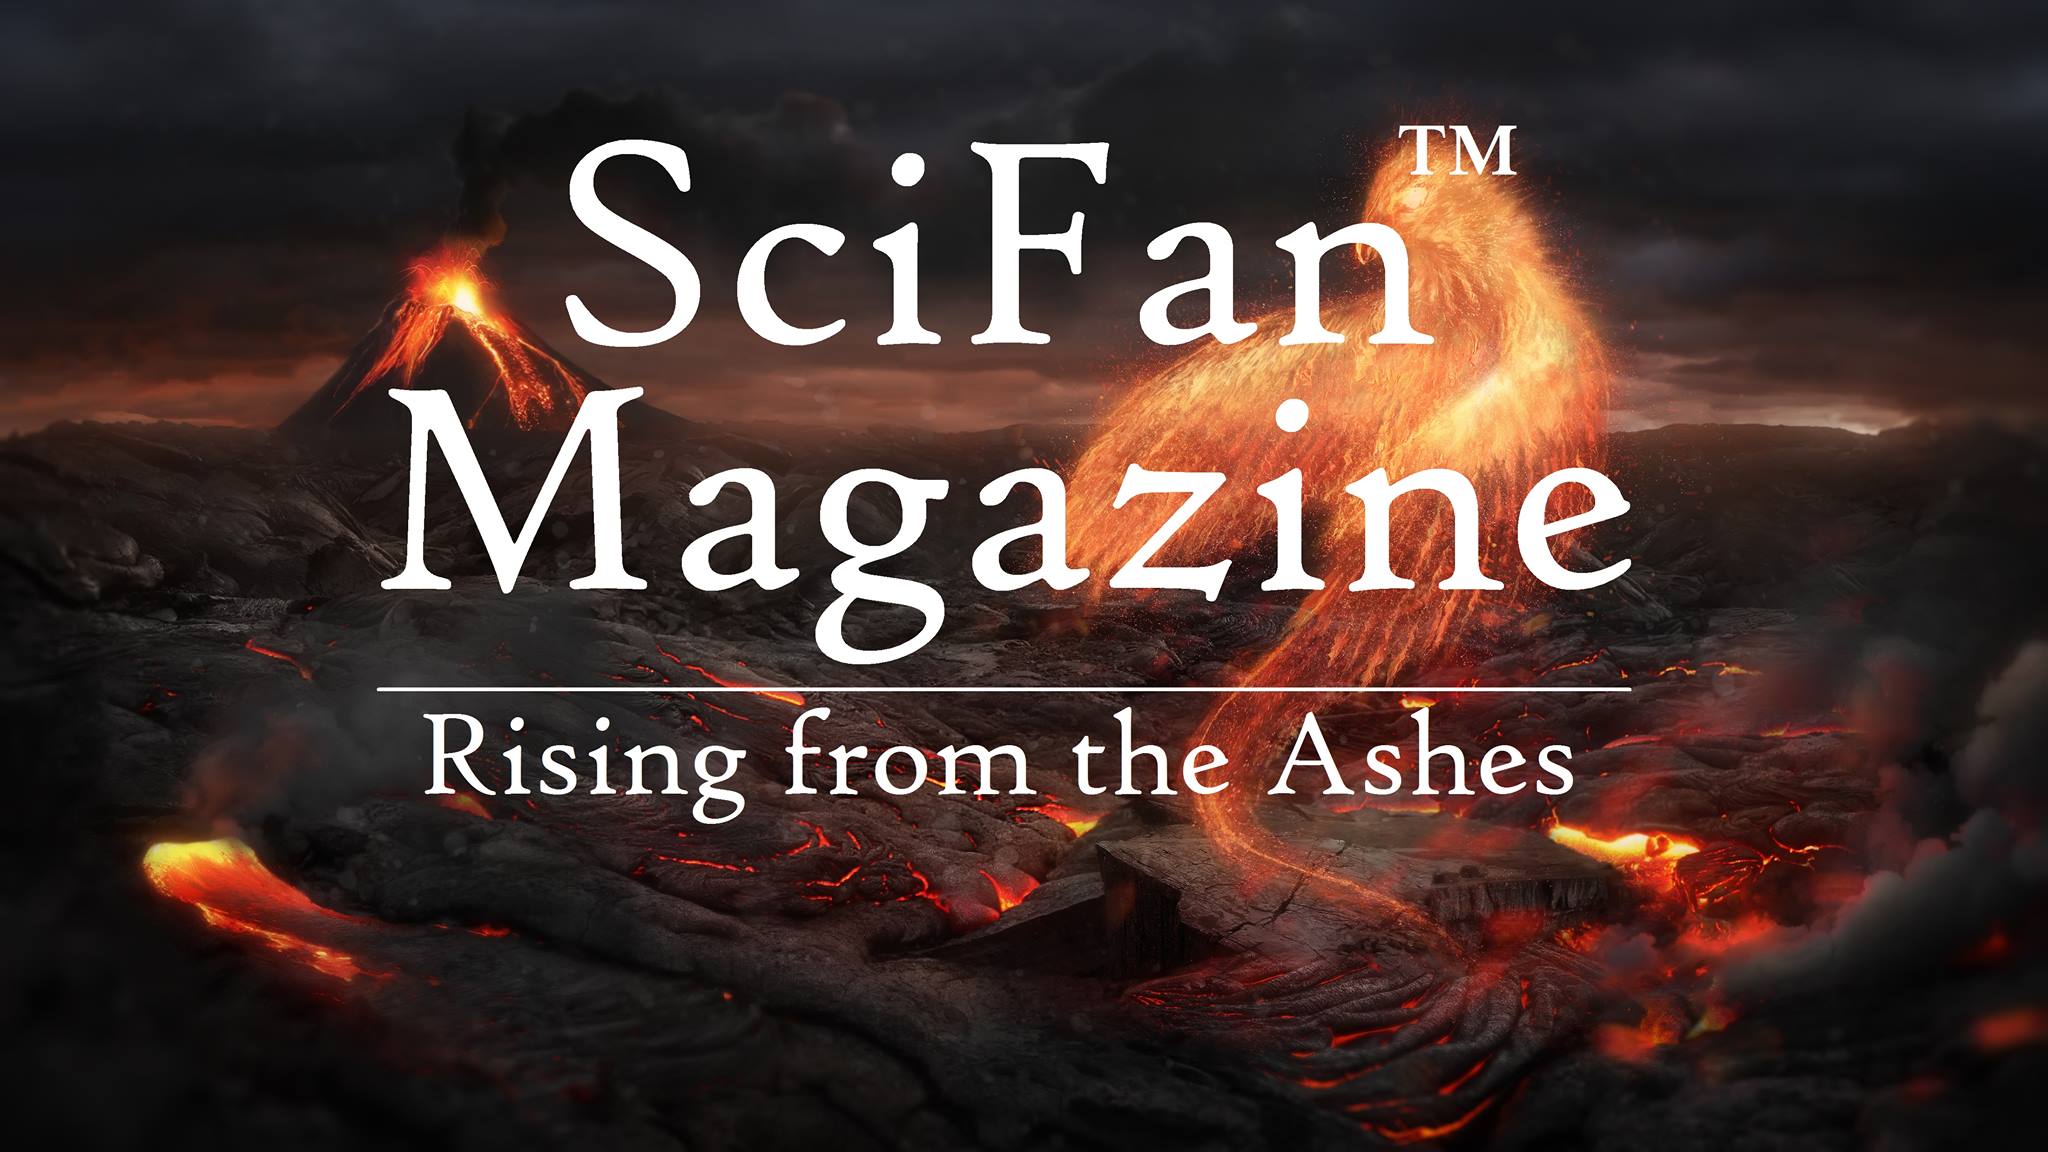 SciFan Magazine Release Party - Andy Zach Will Host